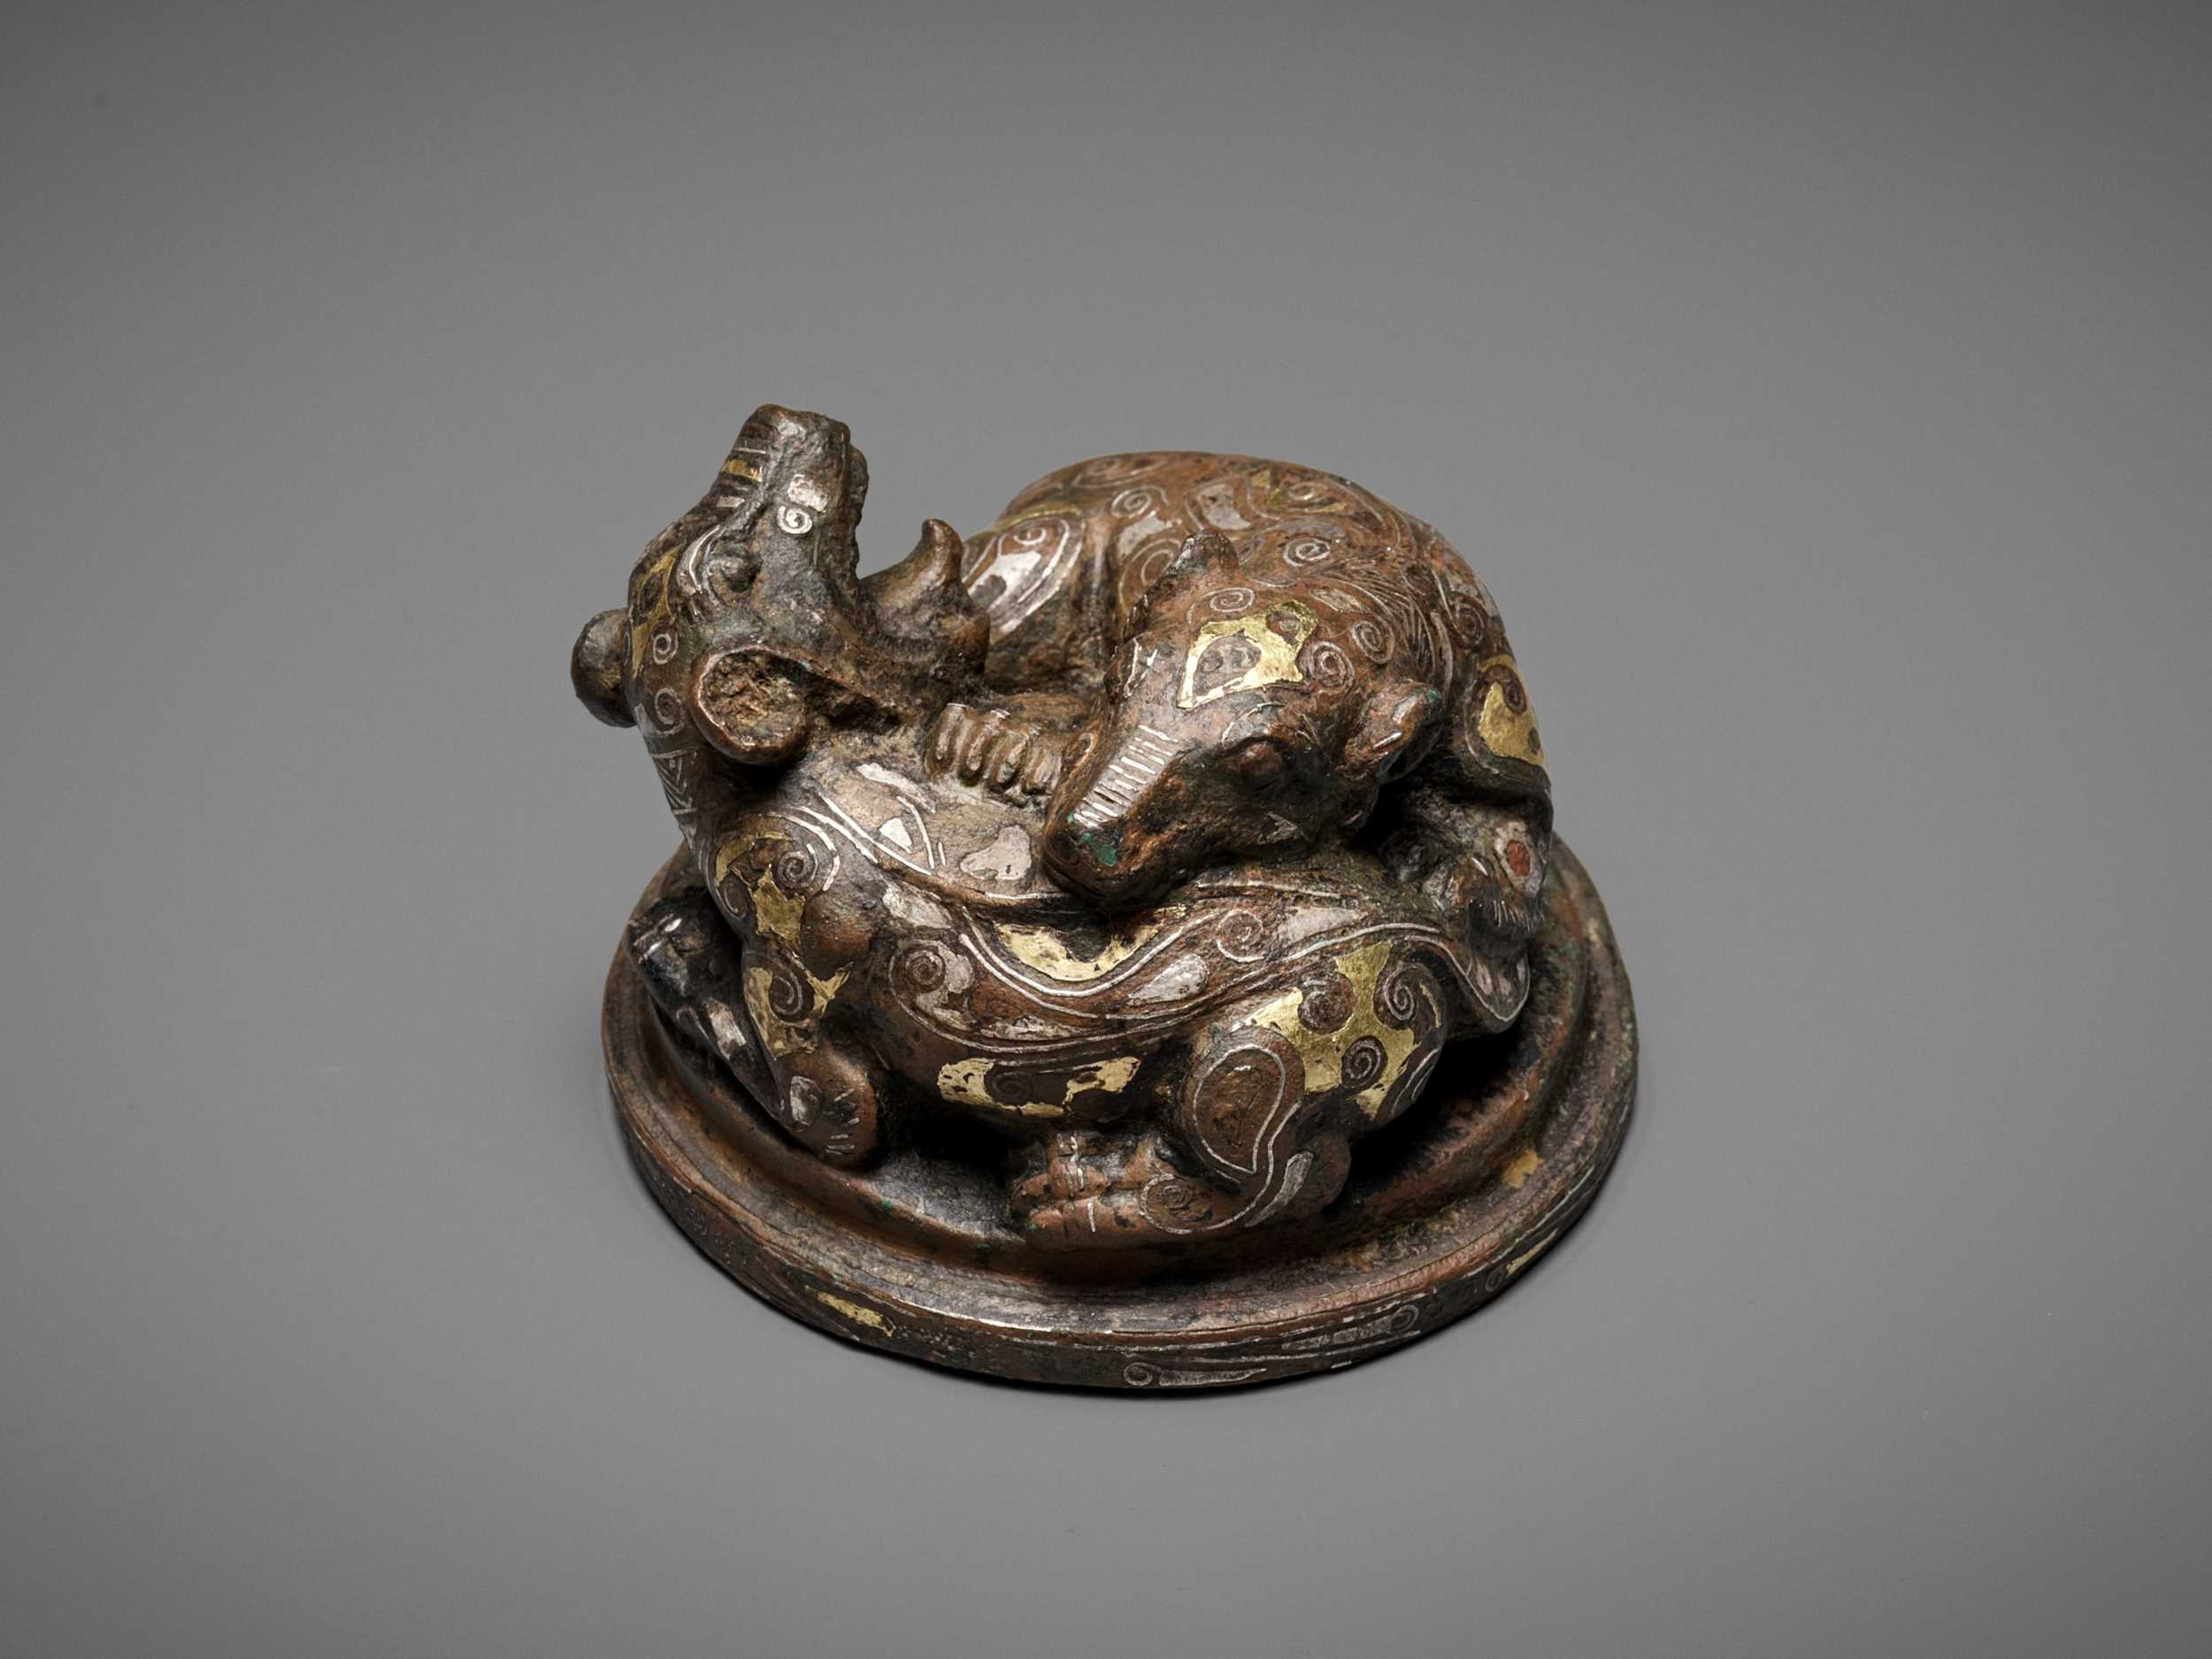 Lot 141 - A GOLD AND SILVER-INLAID ‘FIGHTING BEARS’ BRONZE MAT WEIGHT, WARRING STATES TO HAN DYNASTY